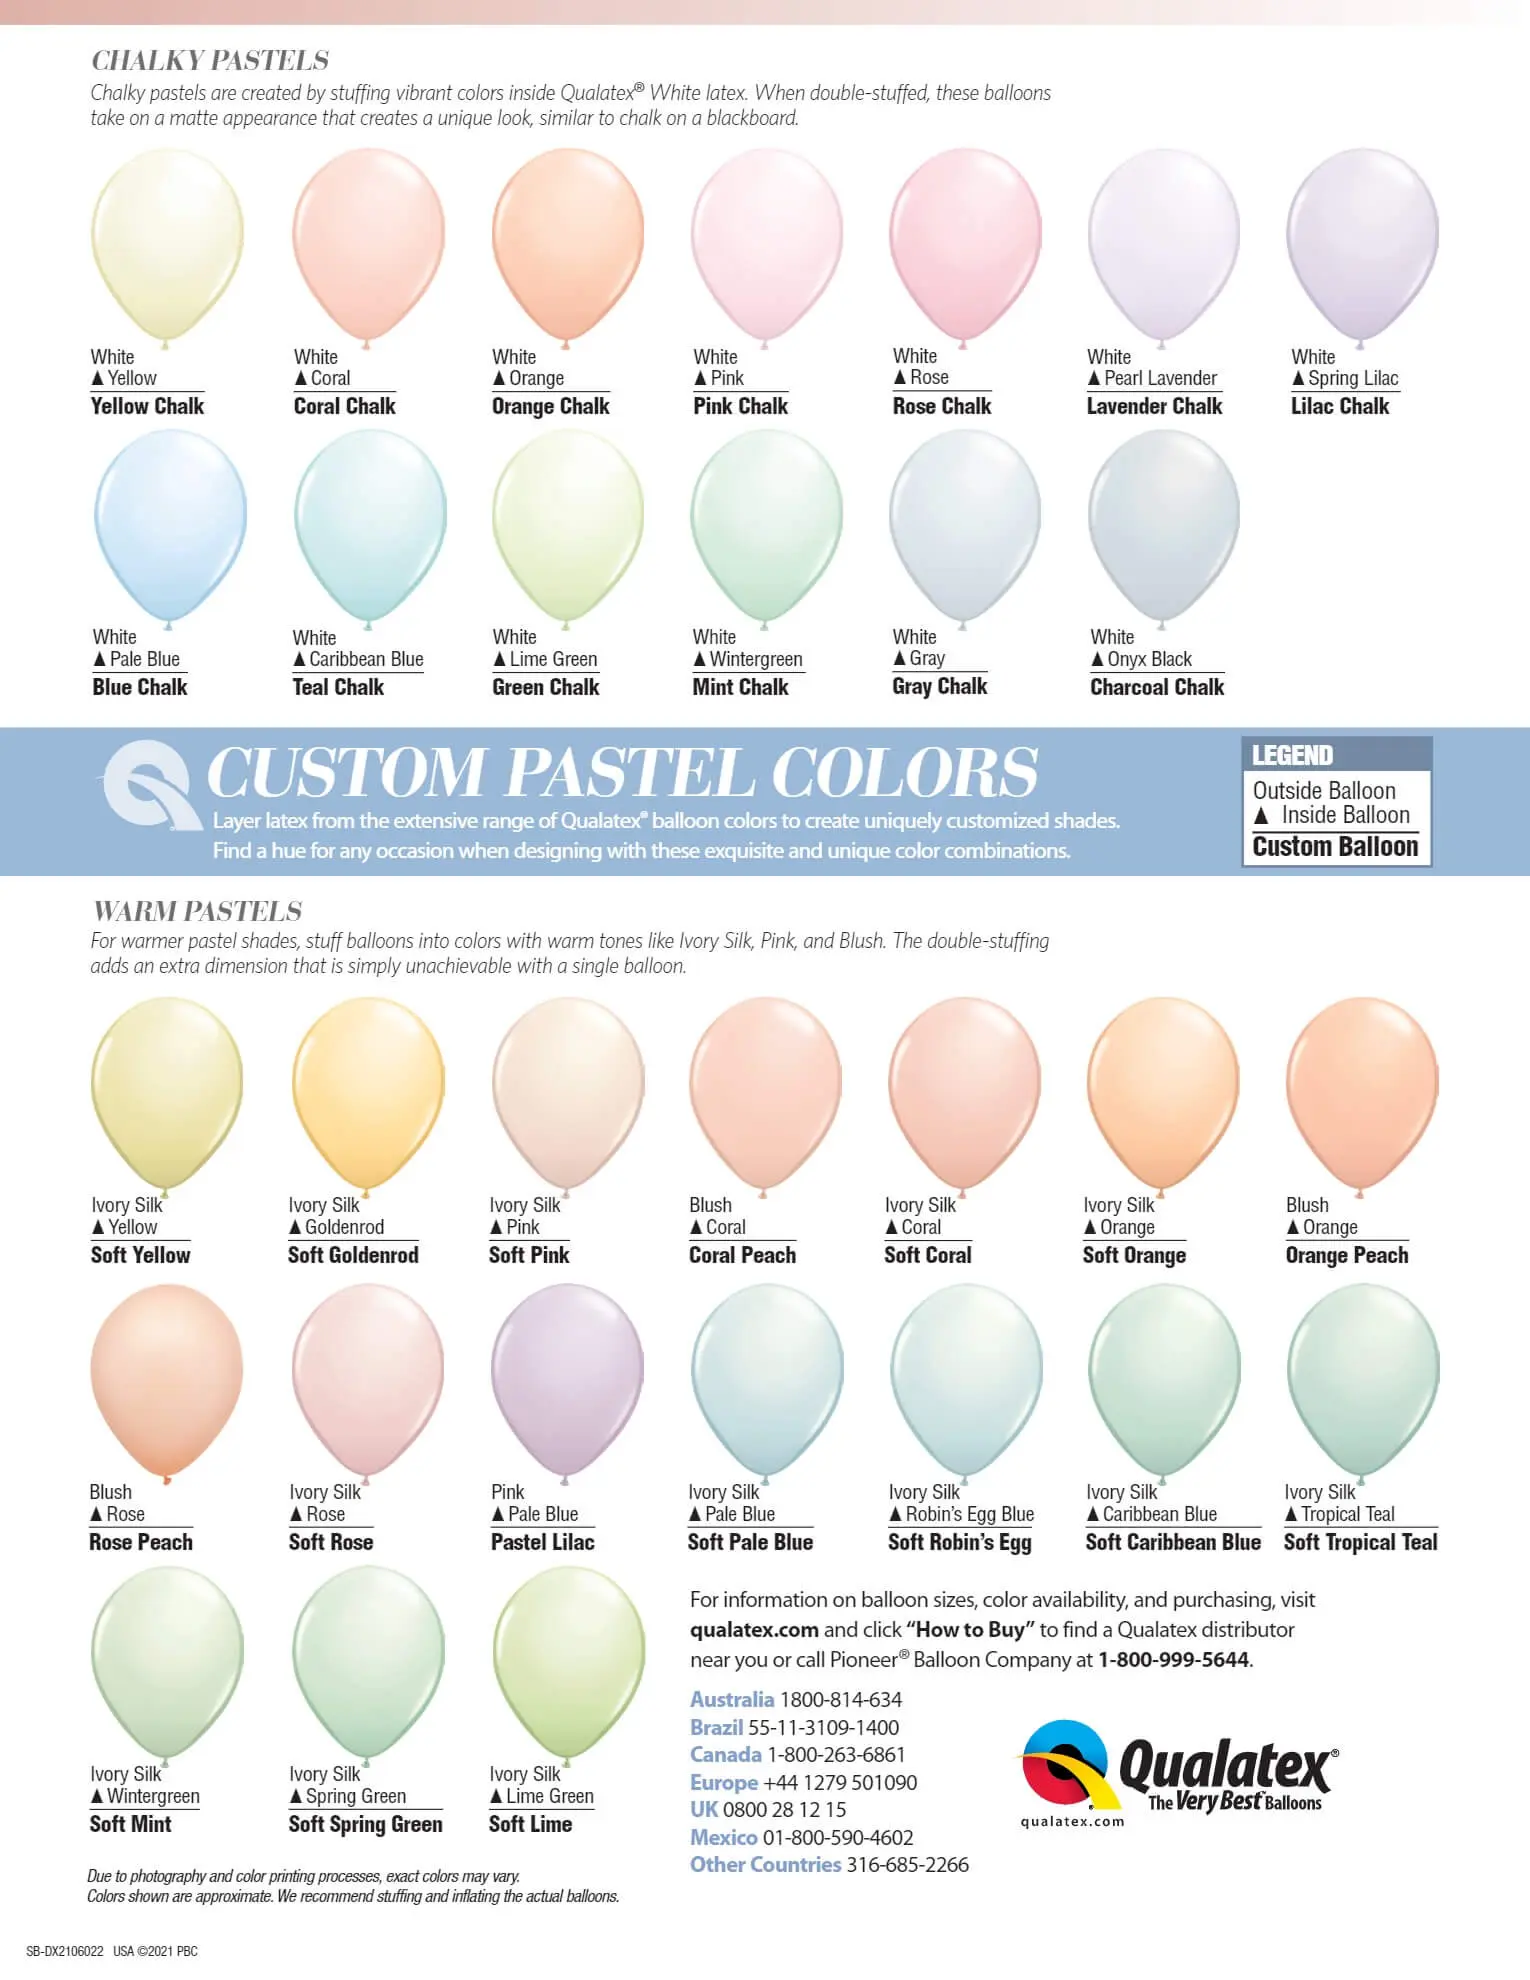 Custom Pastel Color Balloon Charts in Chalky Pastels and Warm Pastels by Balloons Lane